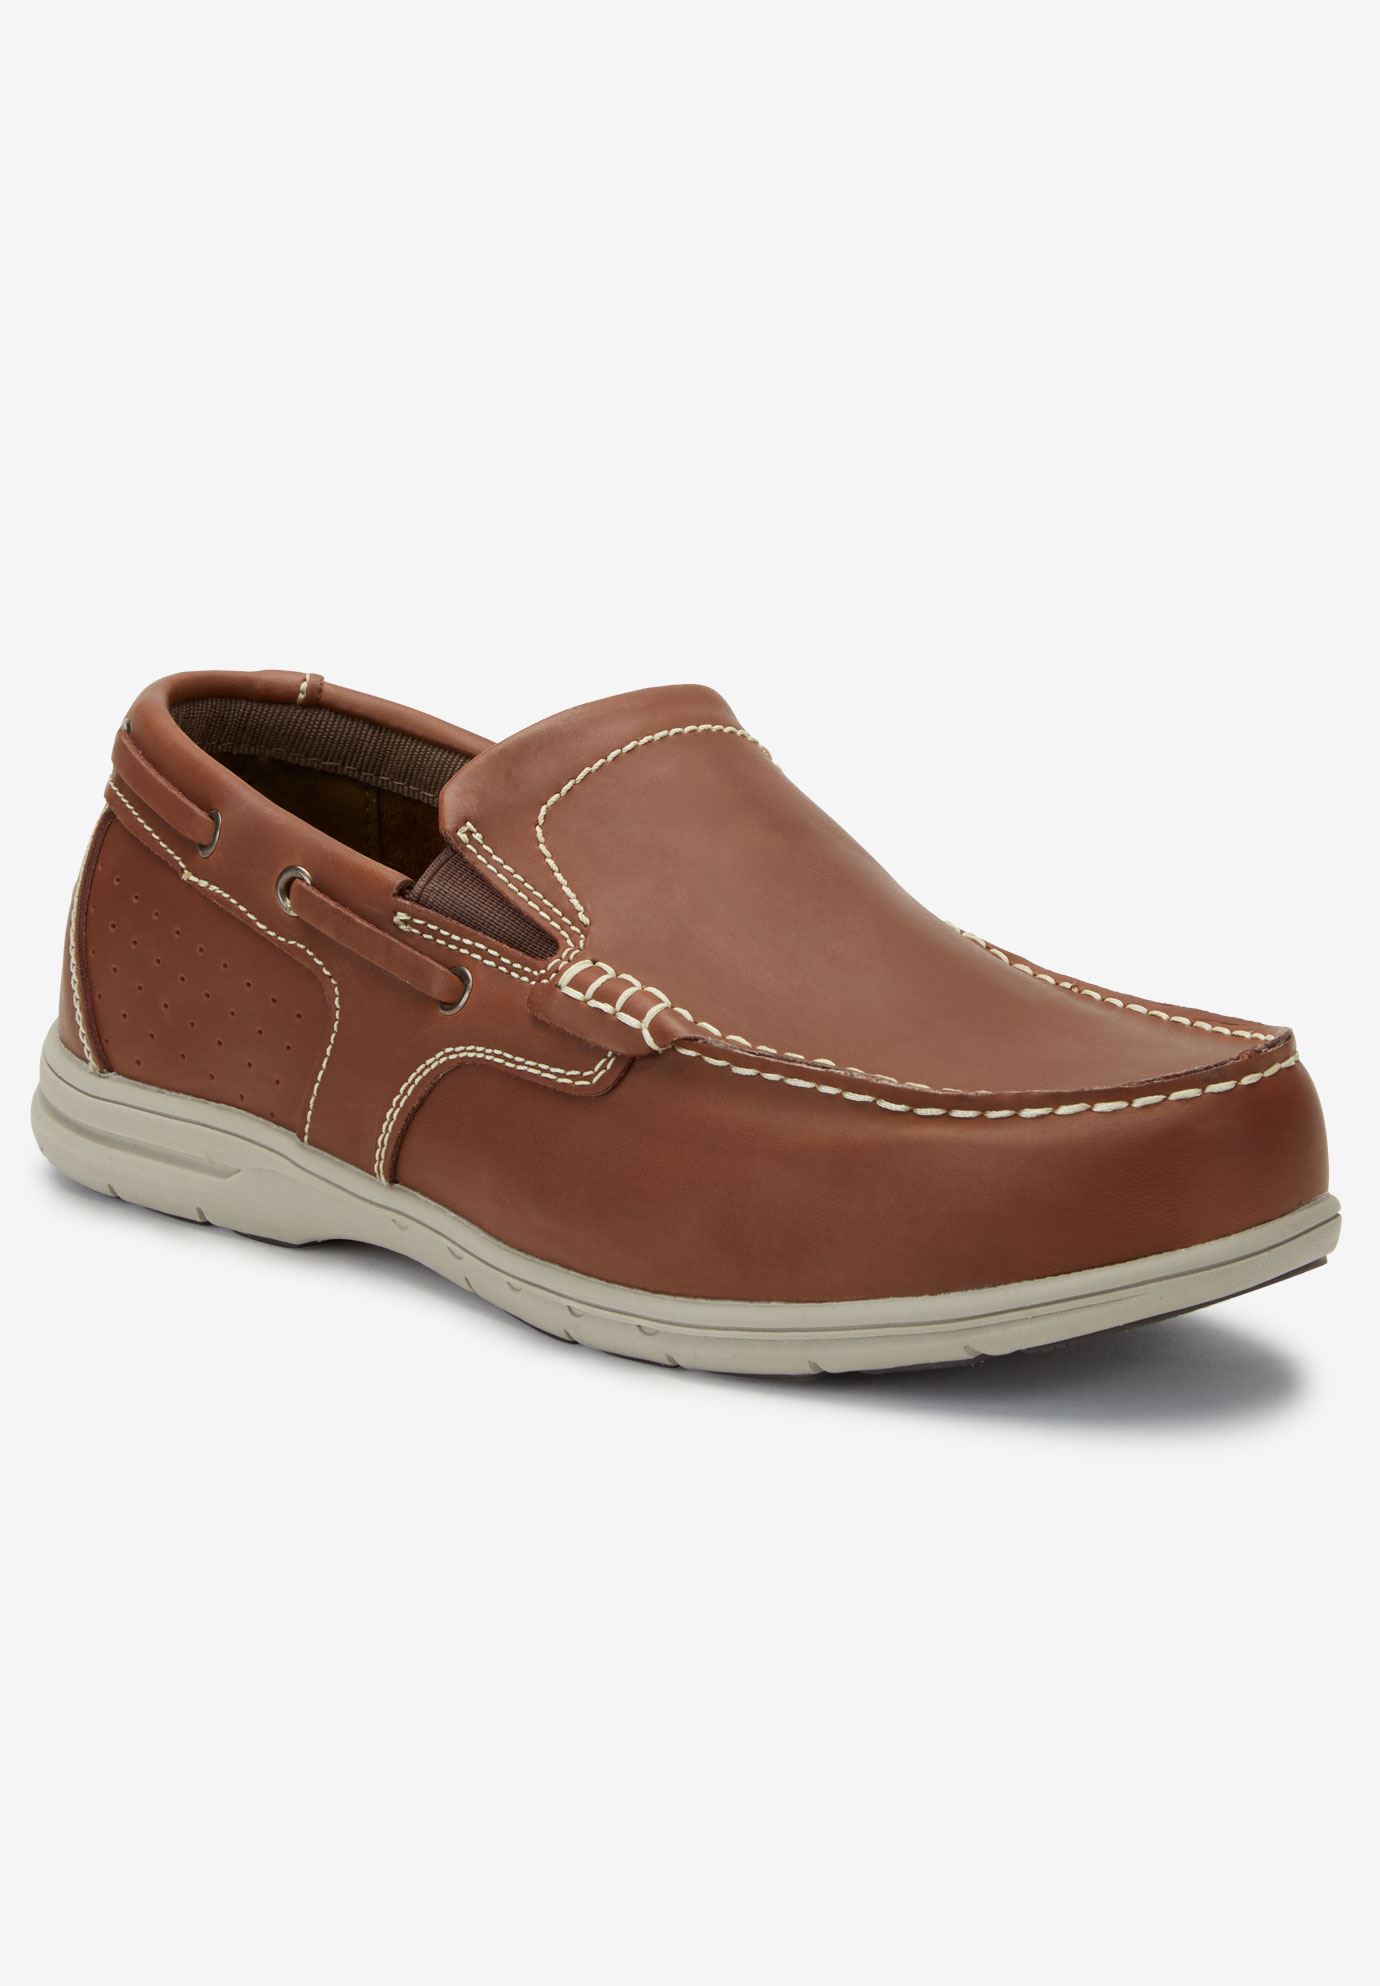 Slip-On Boat Shoes | King Size